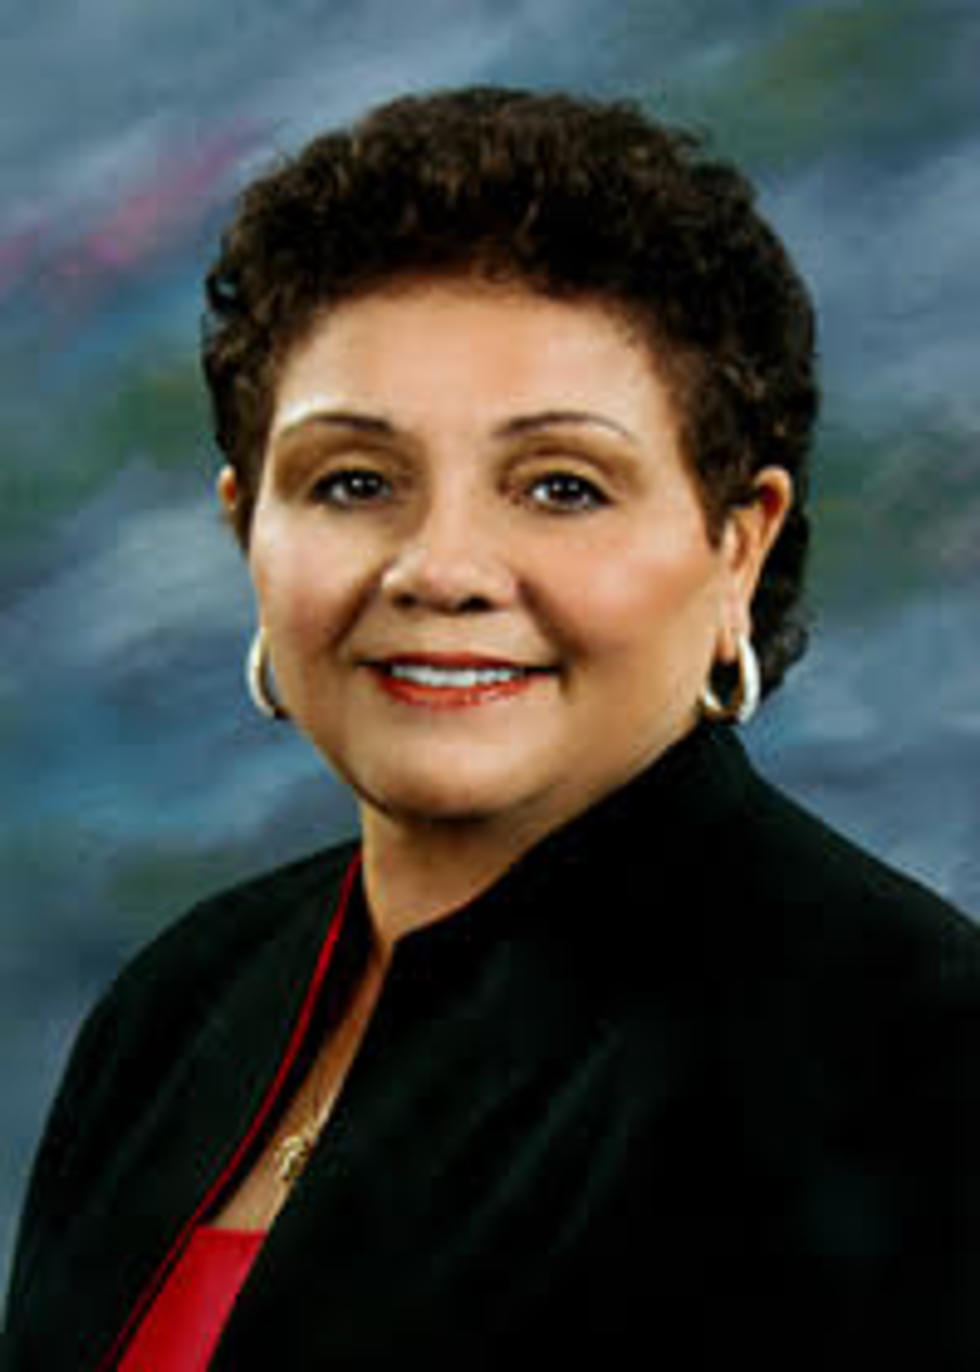 We send our condolences to the family of Councilwoman Mary Morris